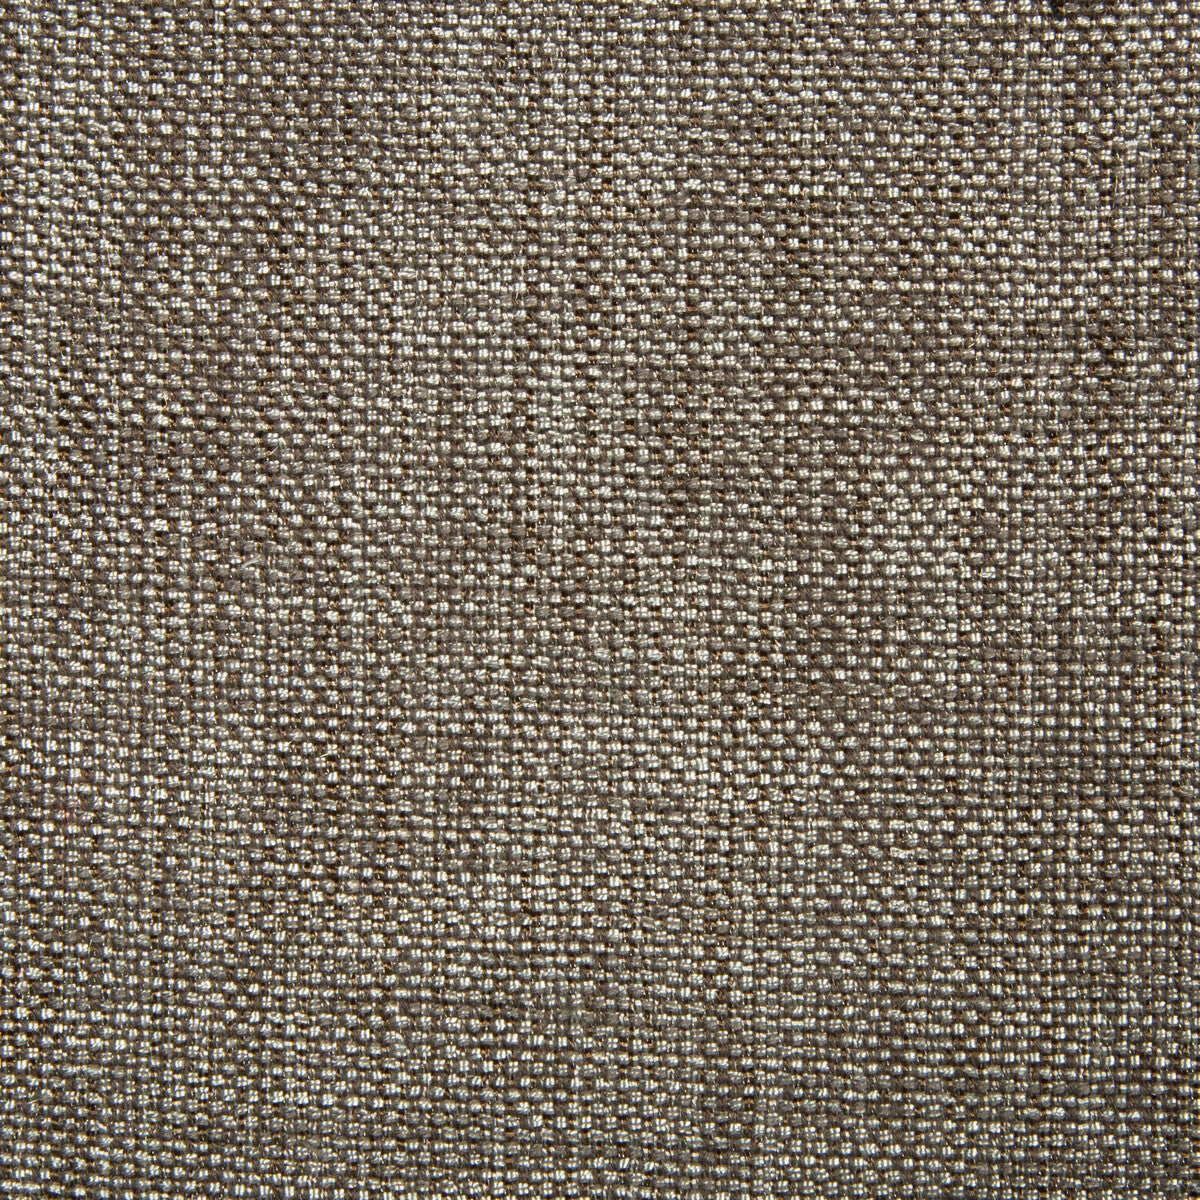 Kravet Contract fabric in 4458-52 color - pattern 4458.52.0 - by Kravet Contract